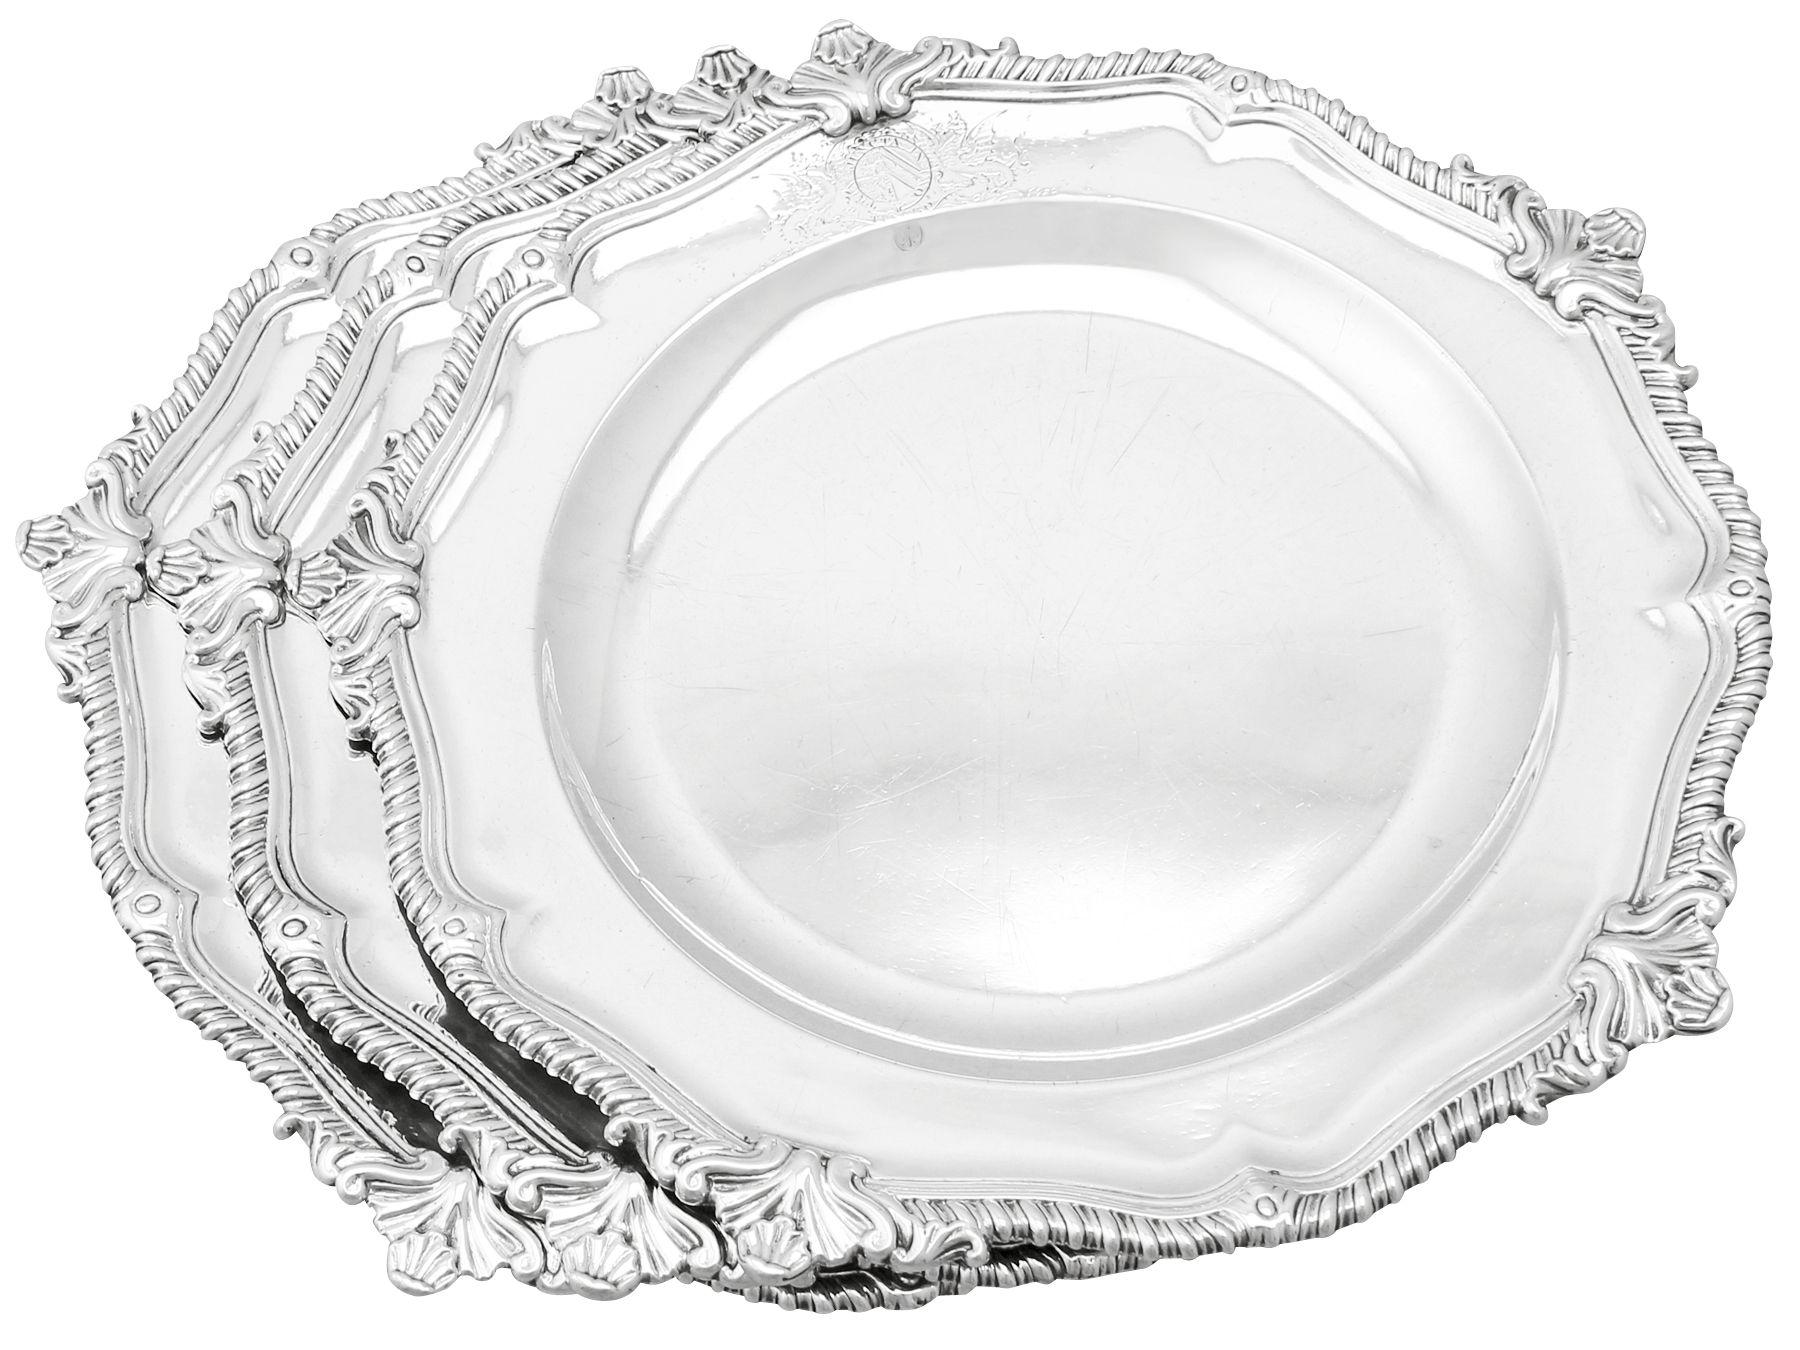 An exceptional, fine and impressive set of three antique Georgian English sterling silver dinner plates/second course dishes, an addition to our range of collectable dining silverware.

These exceptional antique George II sterling silver dinner